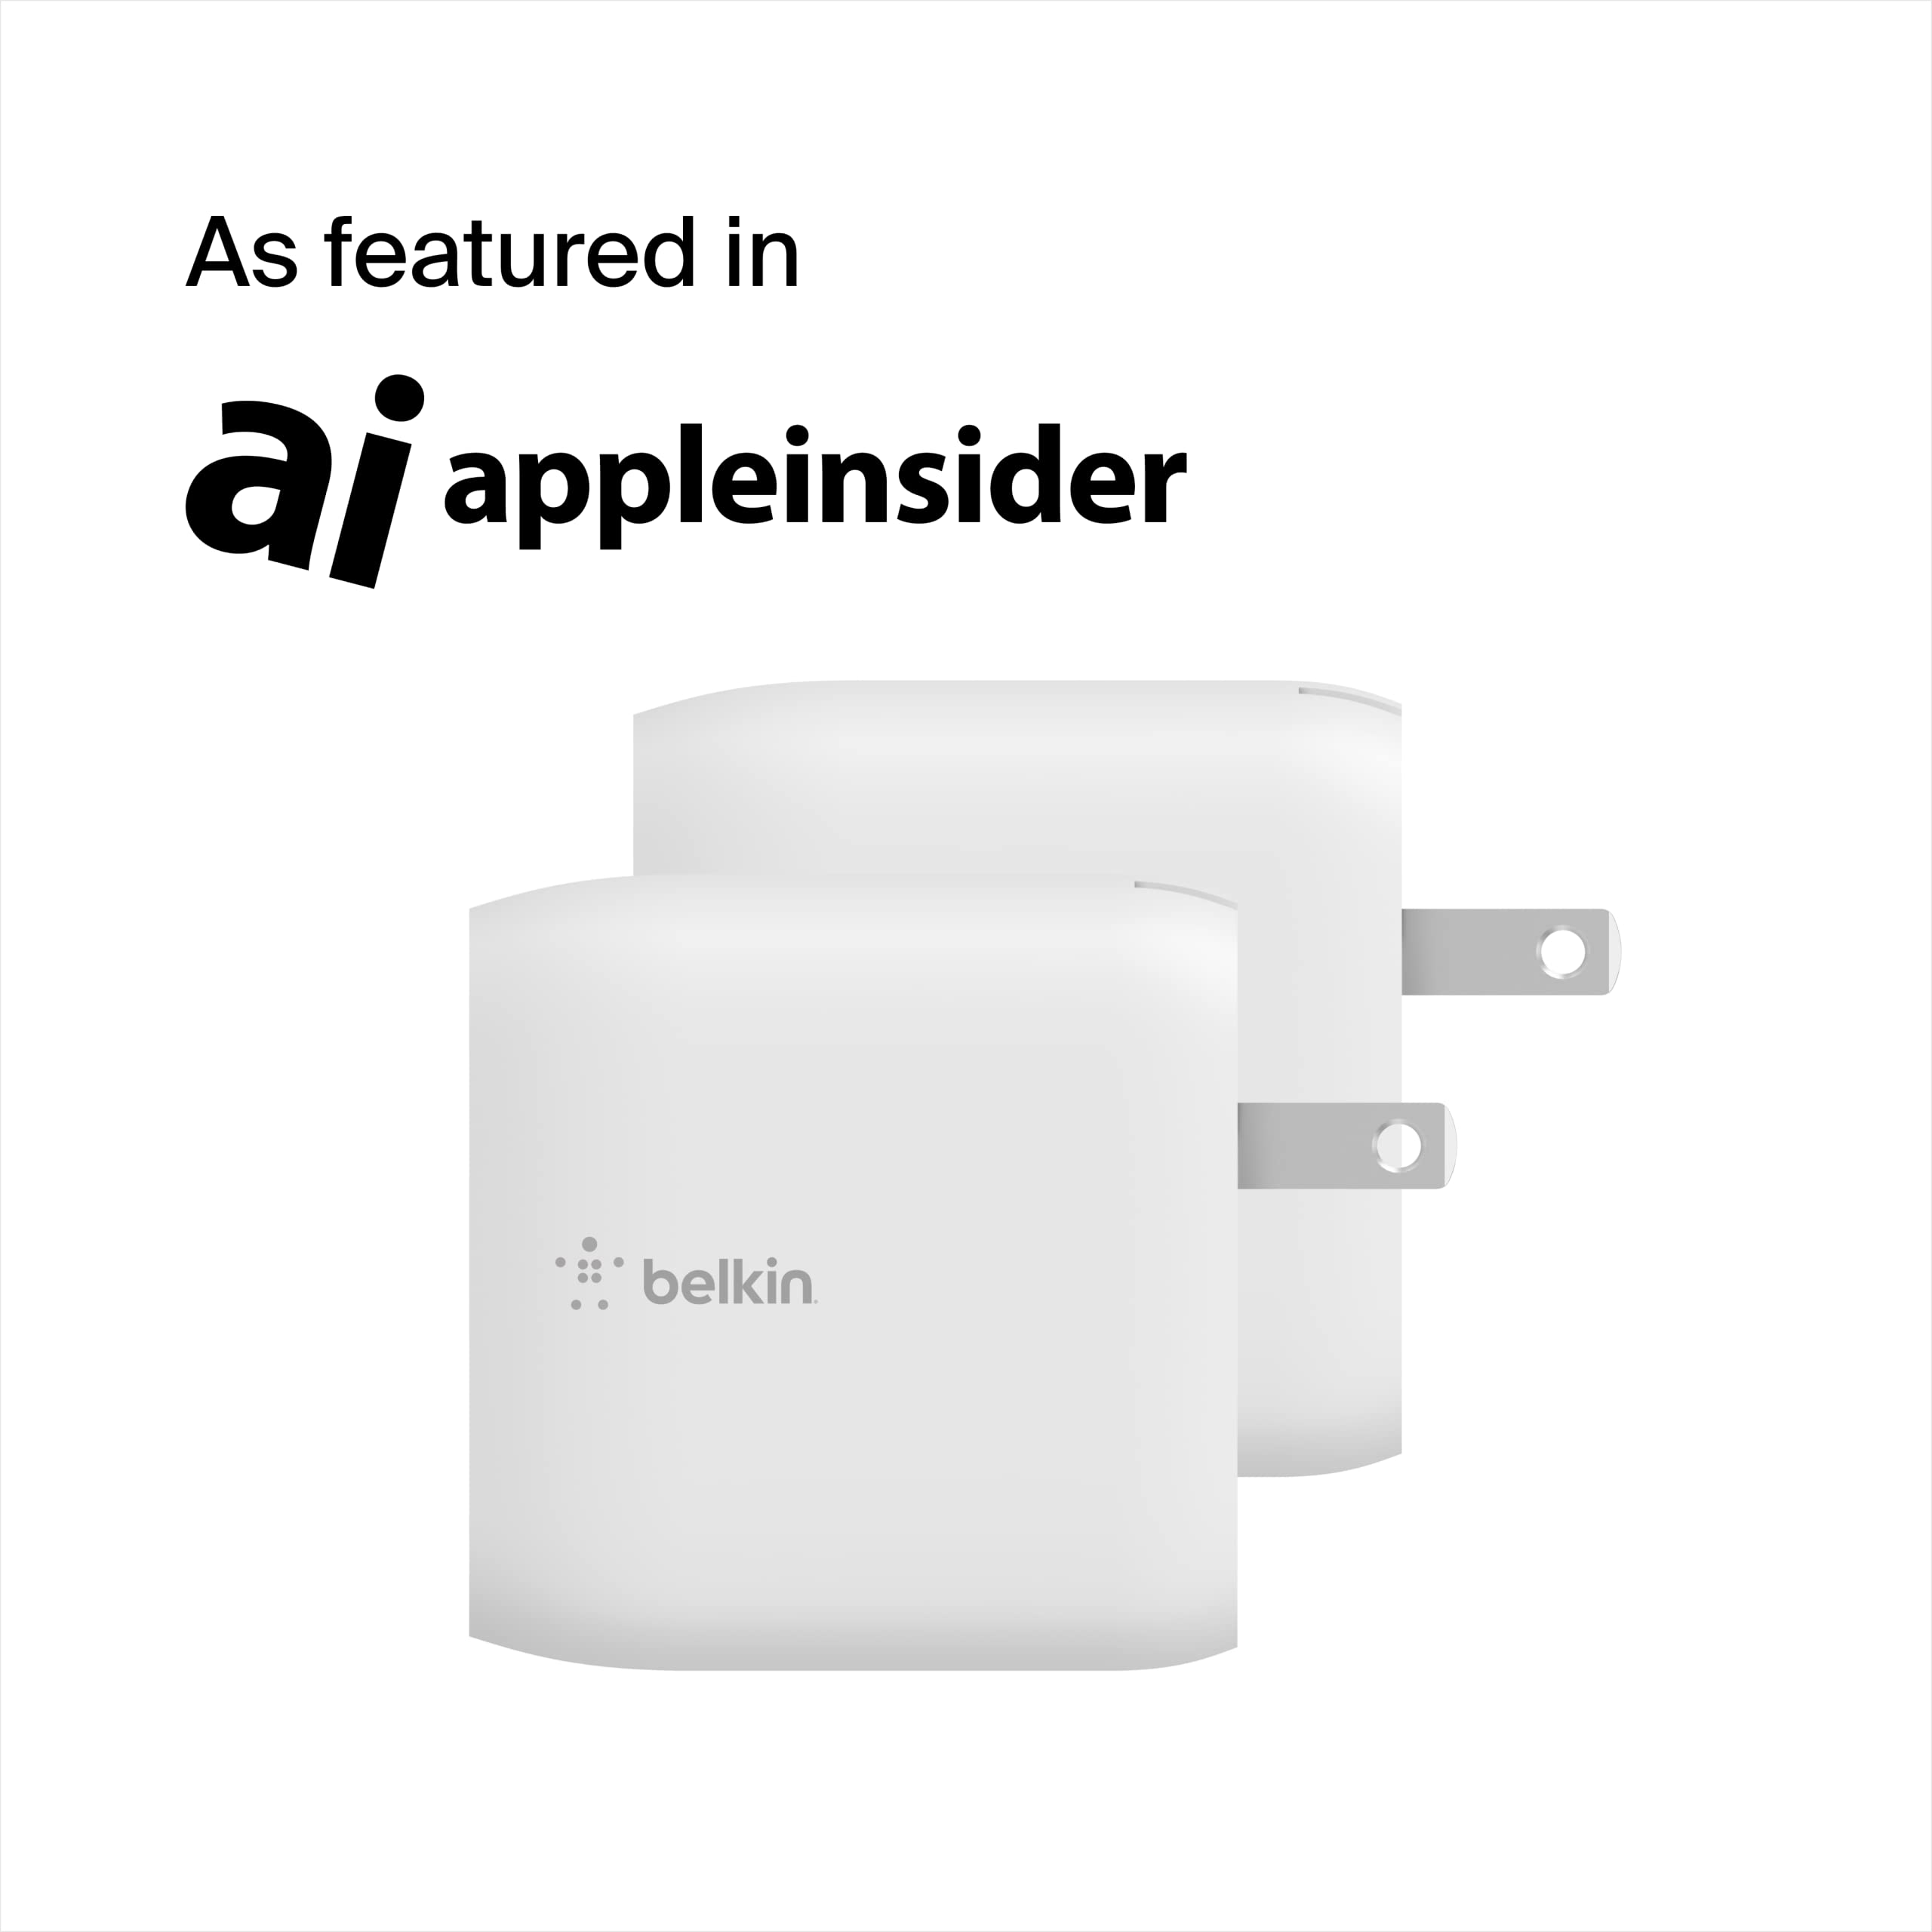 Belkin 40W Dual Port USB C Wall Charger - USB Type C Charger Fast Charging for iPhone 14, 14 Pro, 14 Pro Max, 13, 13 Pro, 13 Pro Max, Galaxy S21 Ultra, iPad, AirPods & More (2-Pack)